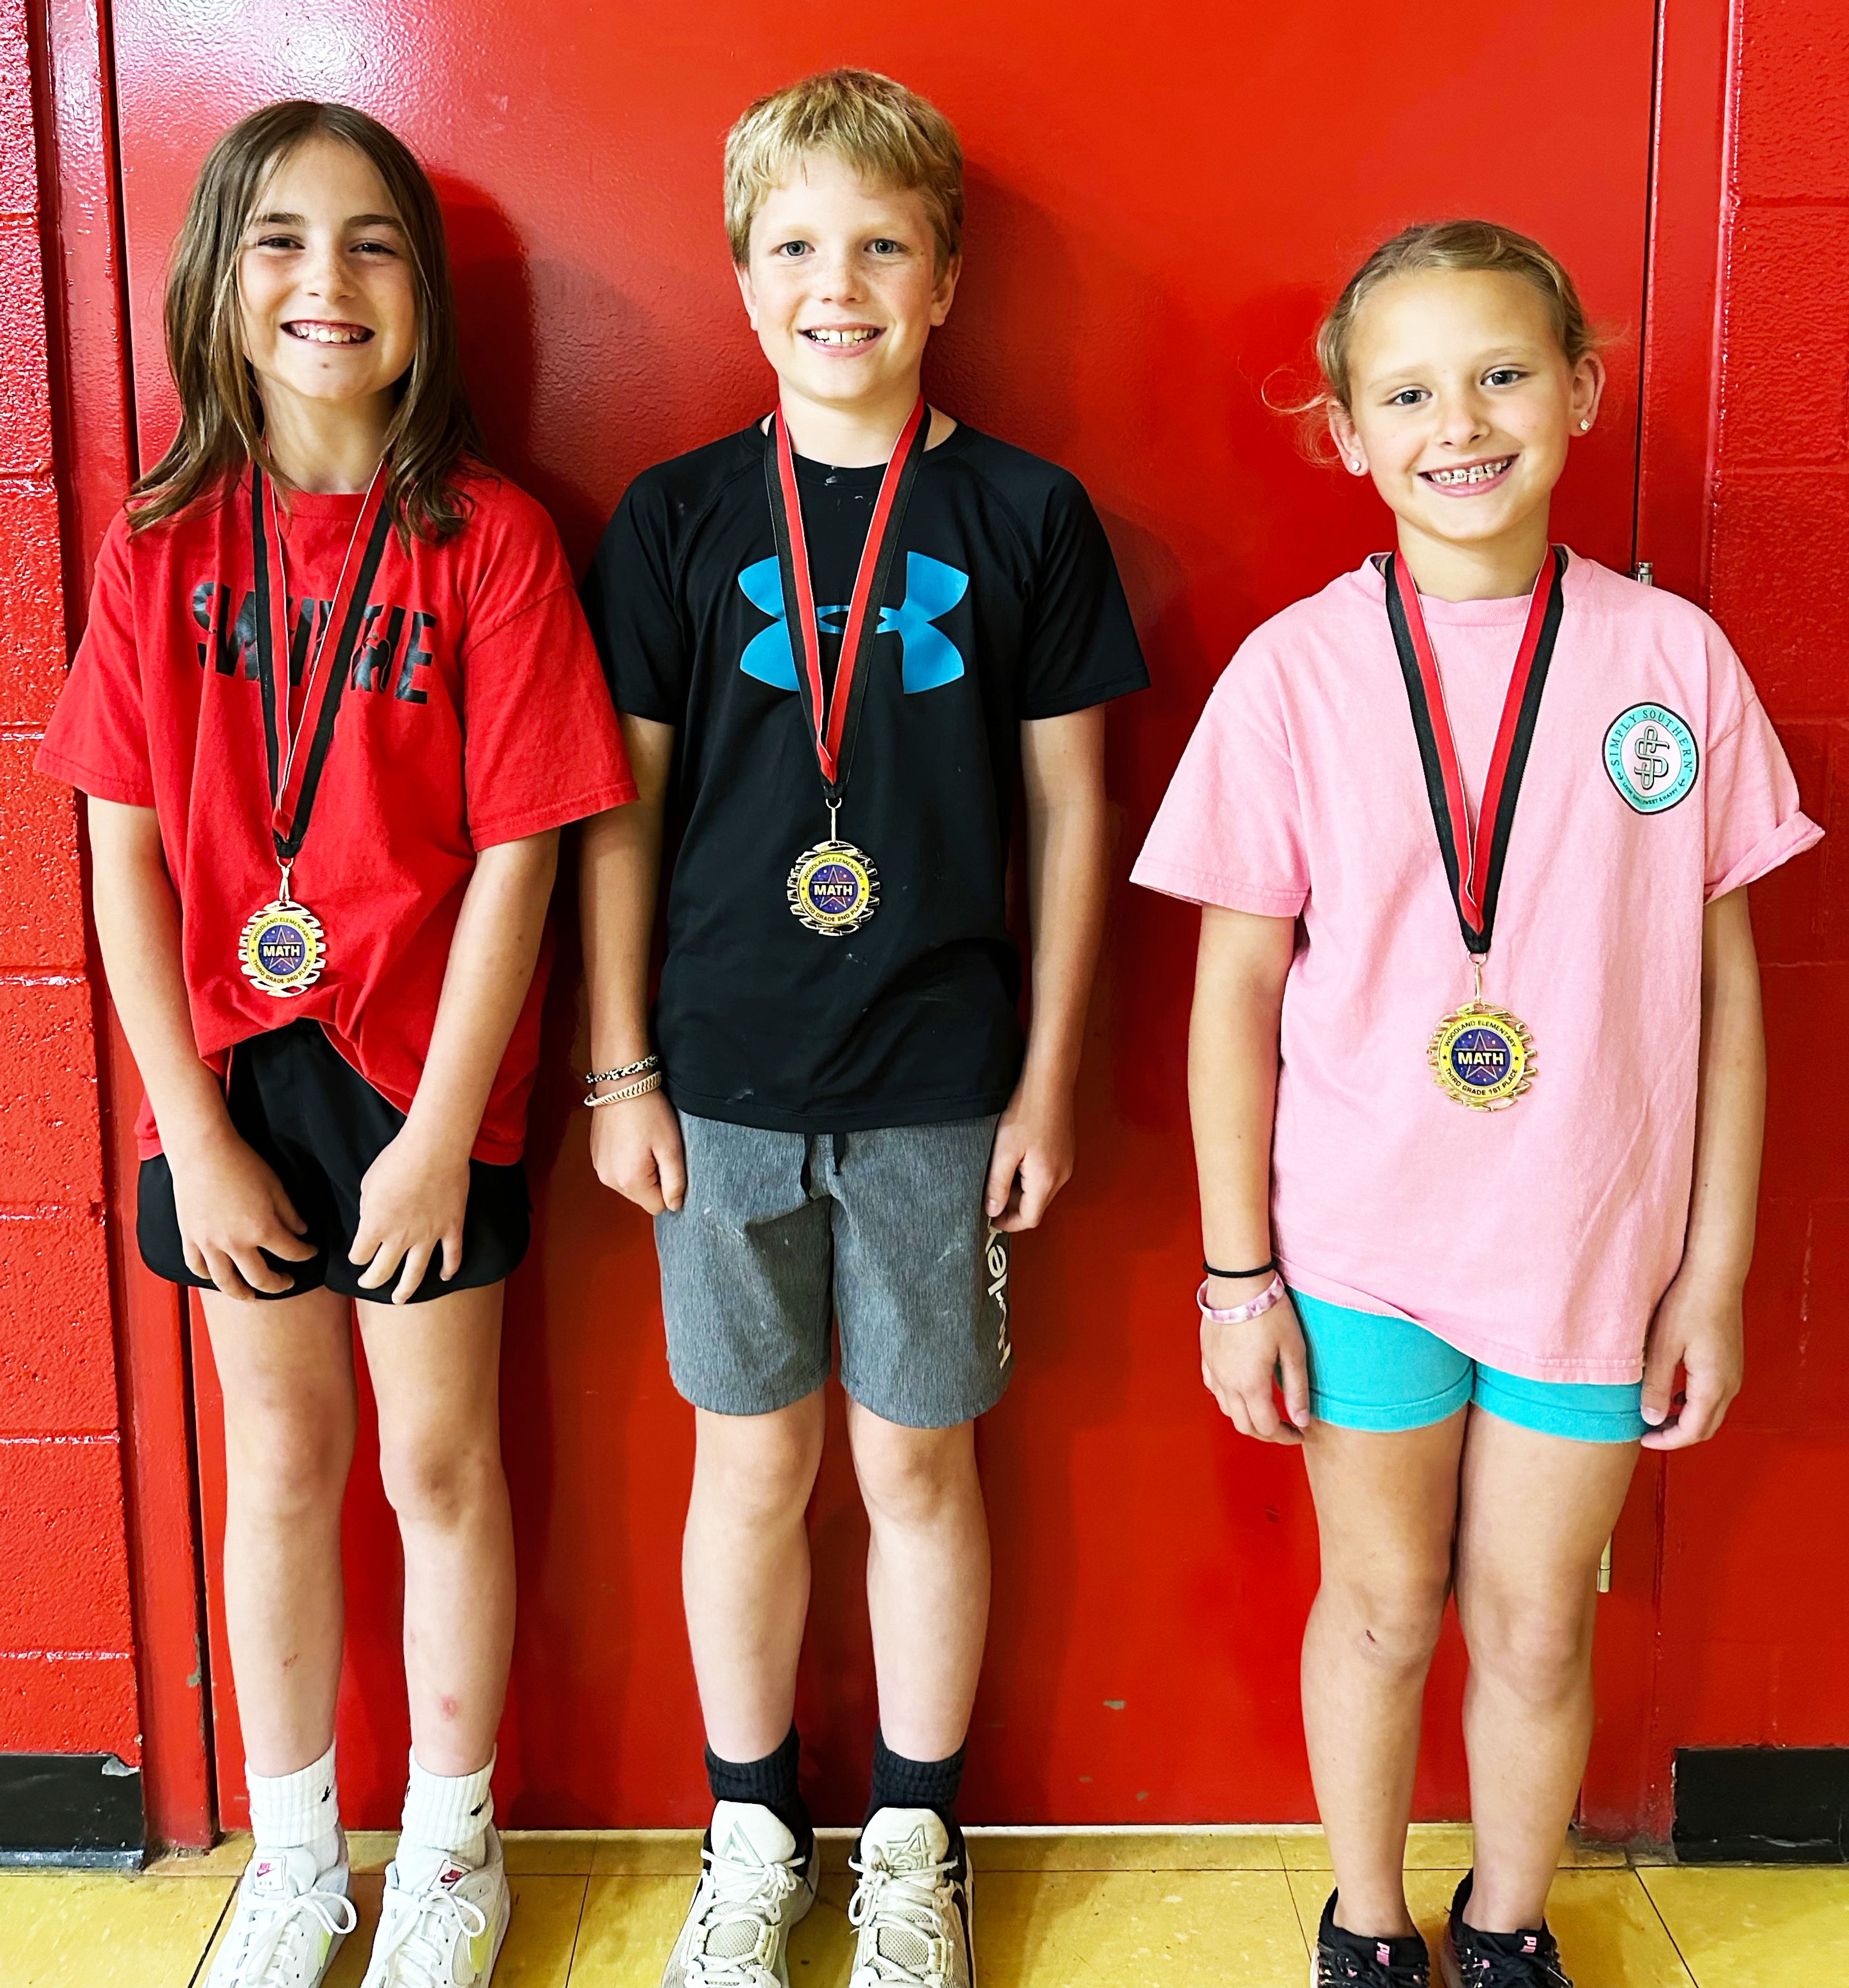 Third-grade winners (from left) include Hadlie Davault, third place; Clate VanGennip, second place; and Alaina Long, first place